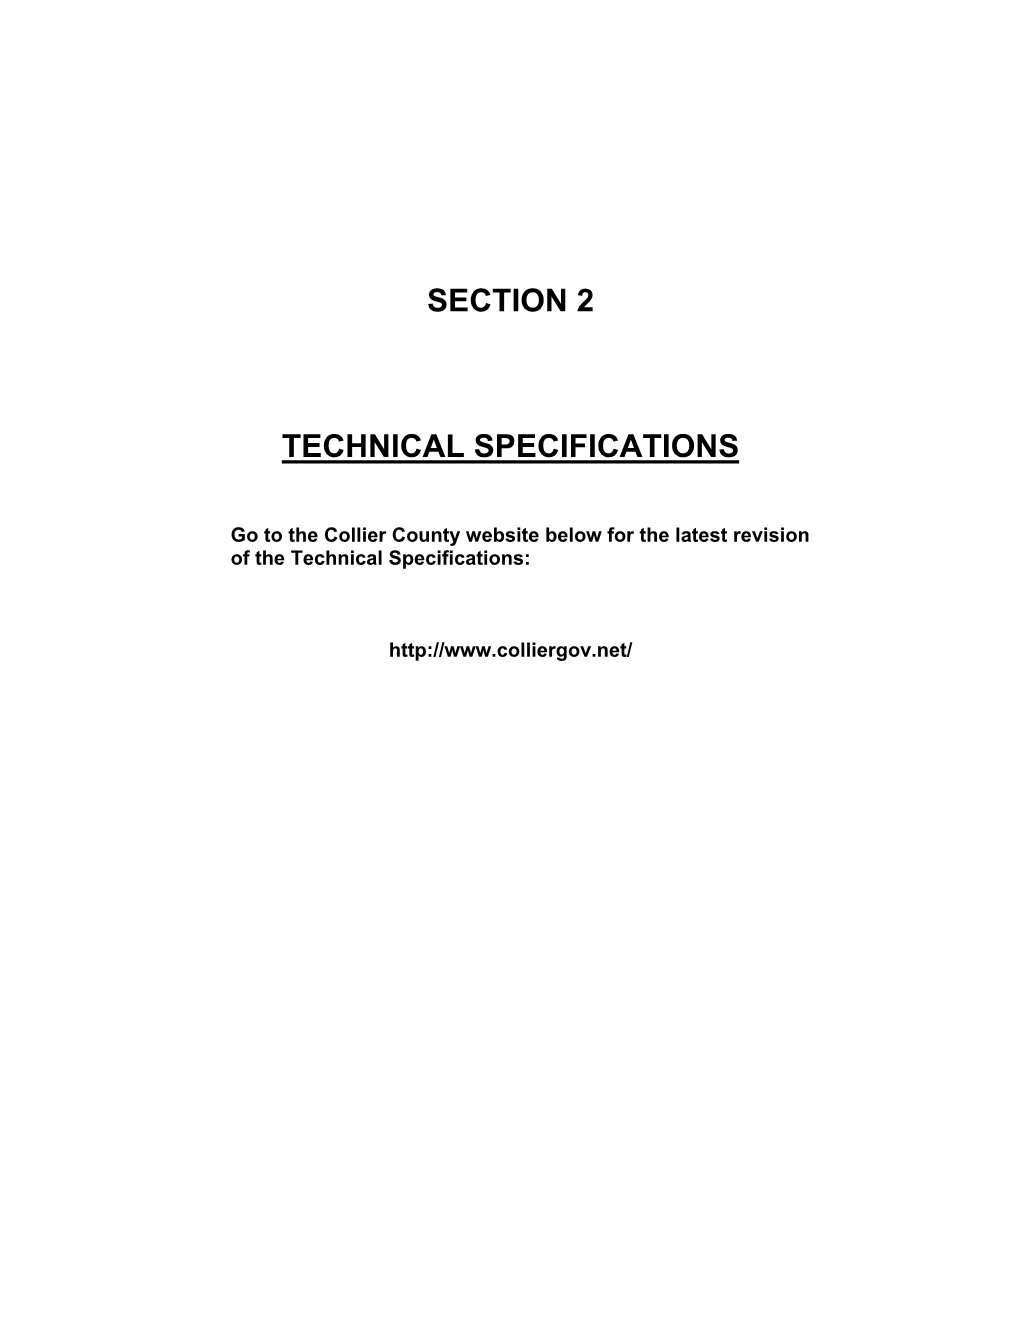 Section 2 Technical Specifications